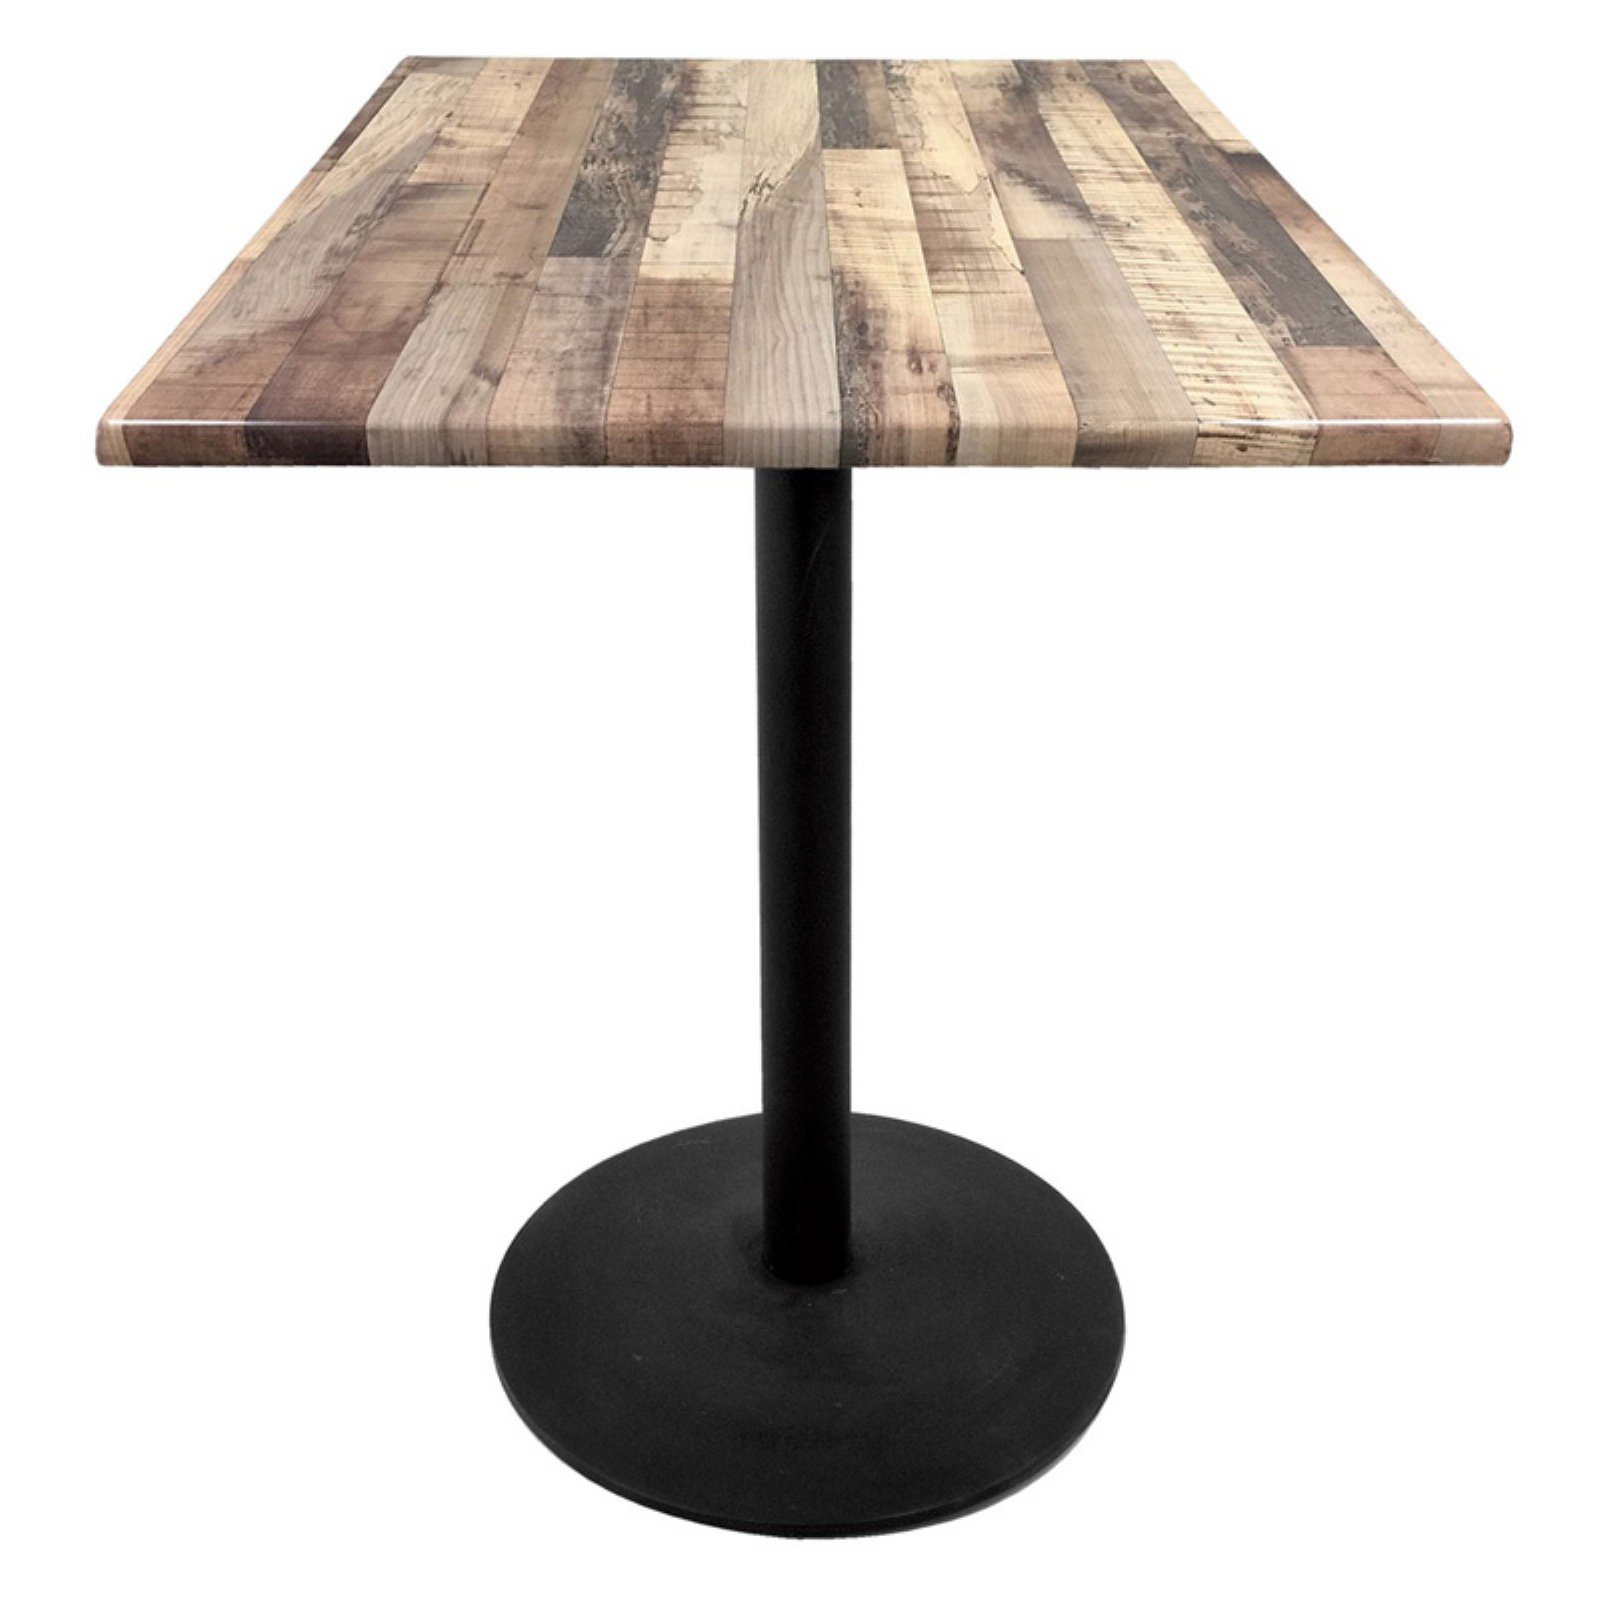 Indoor/Outdoor 30" Tall OD214 Black Table Base with 22" Diameter Foot and 36" x 36" Square Indoor/Outdoor Rustic Top by the Holland Bar Stool Co. - image 1 of 5